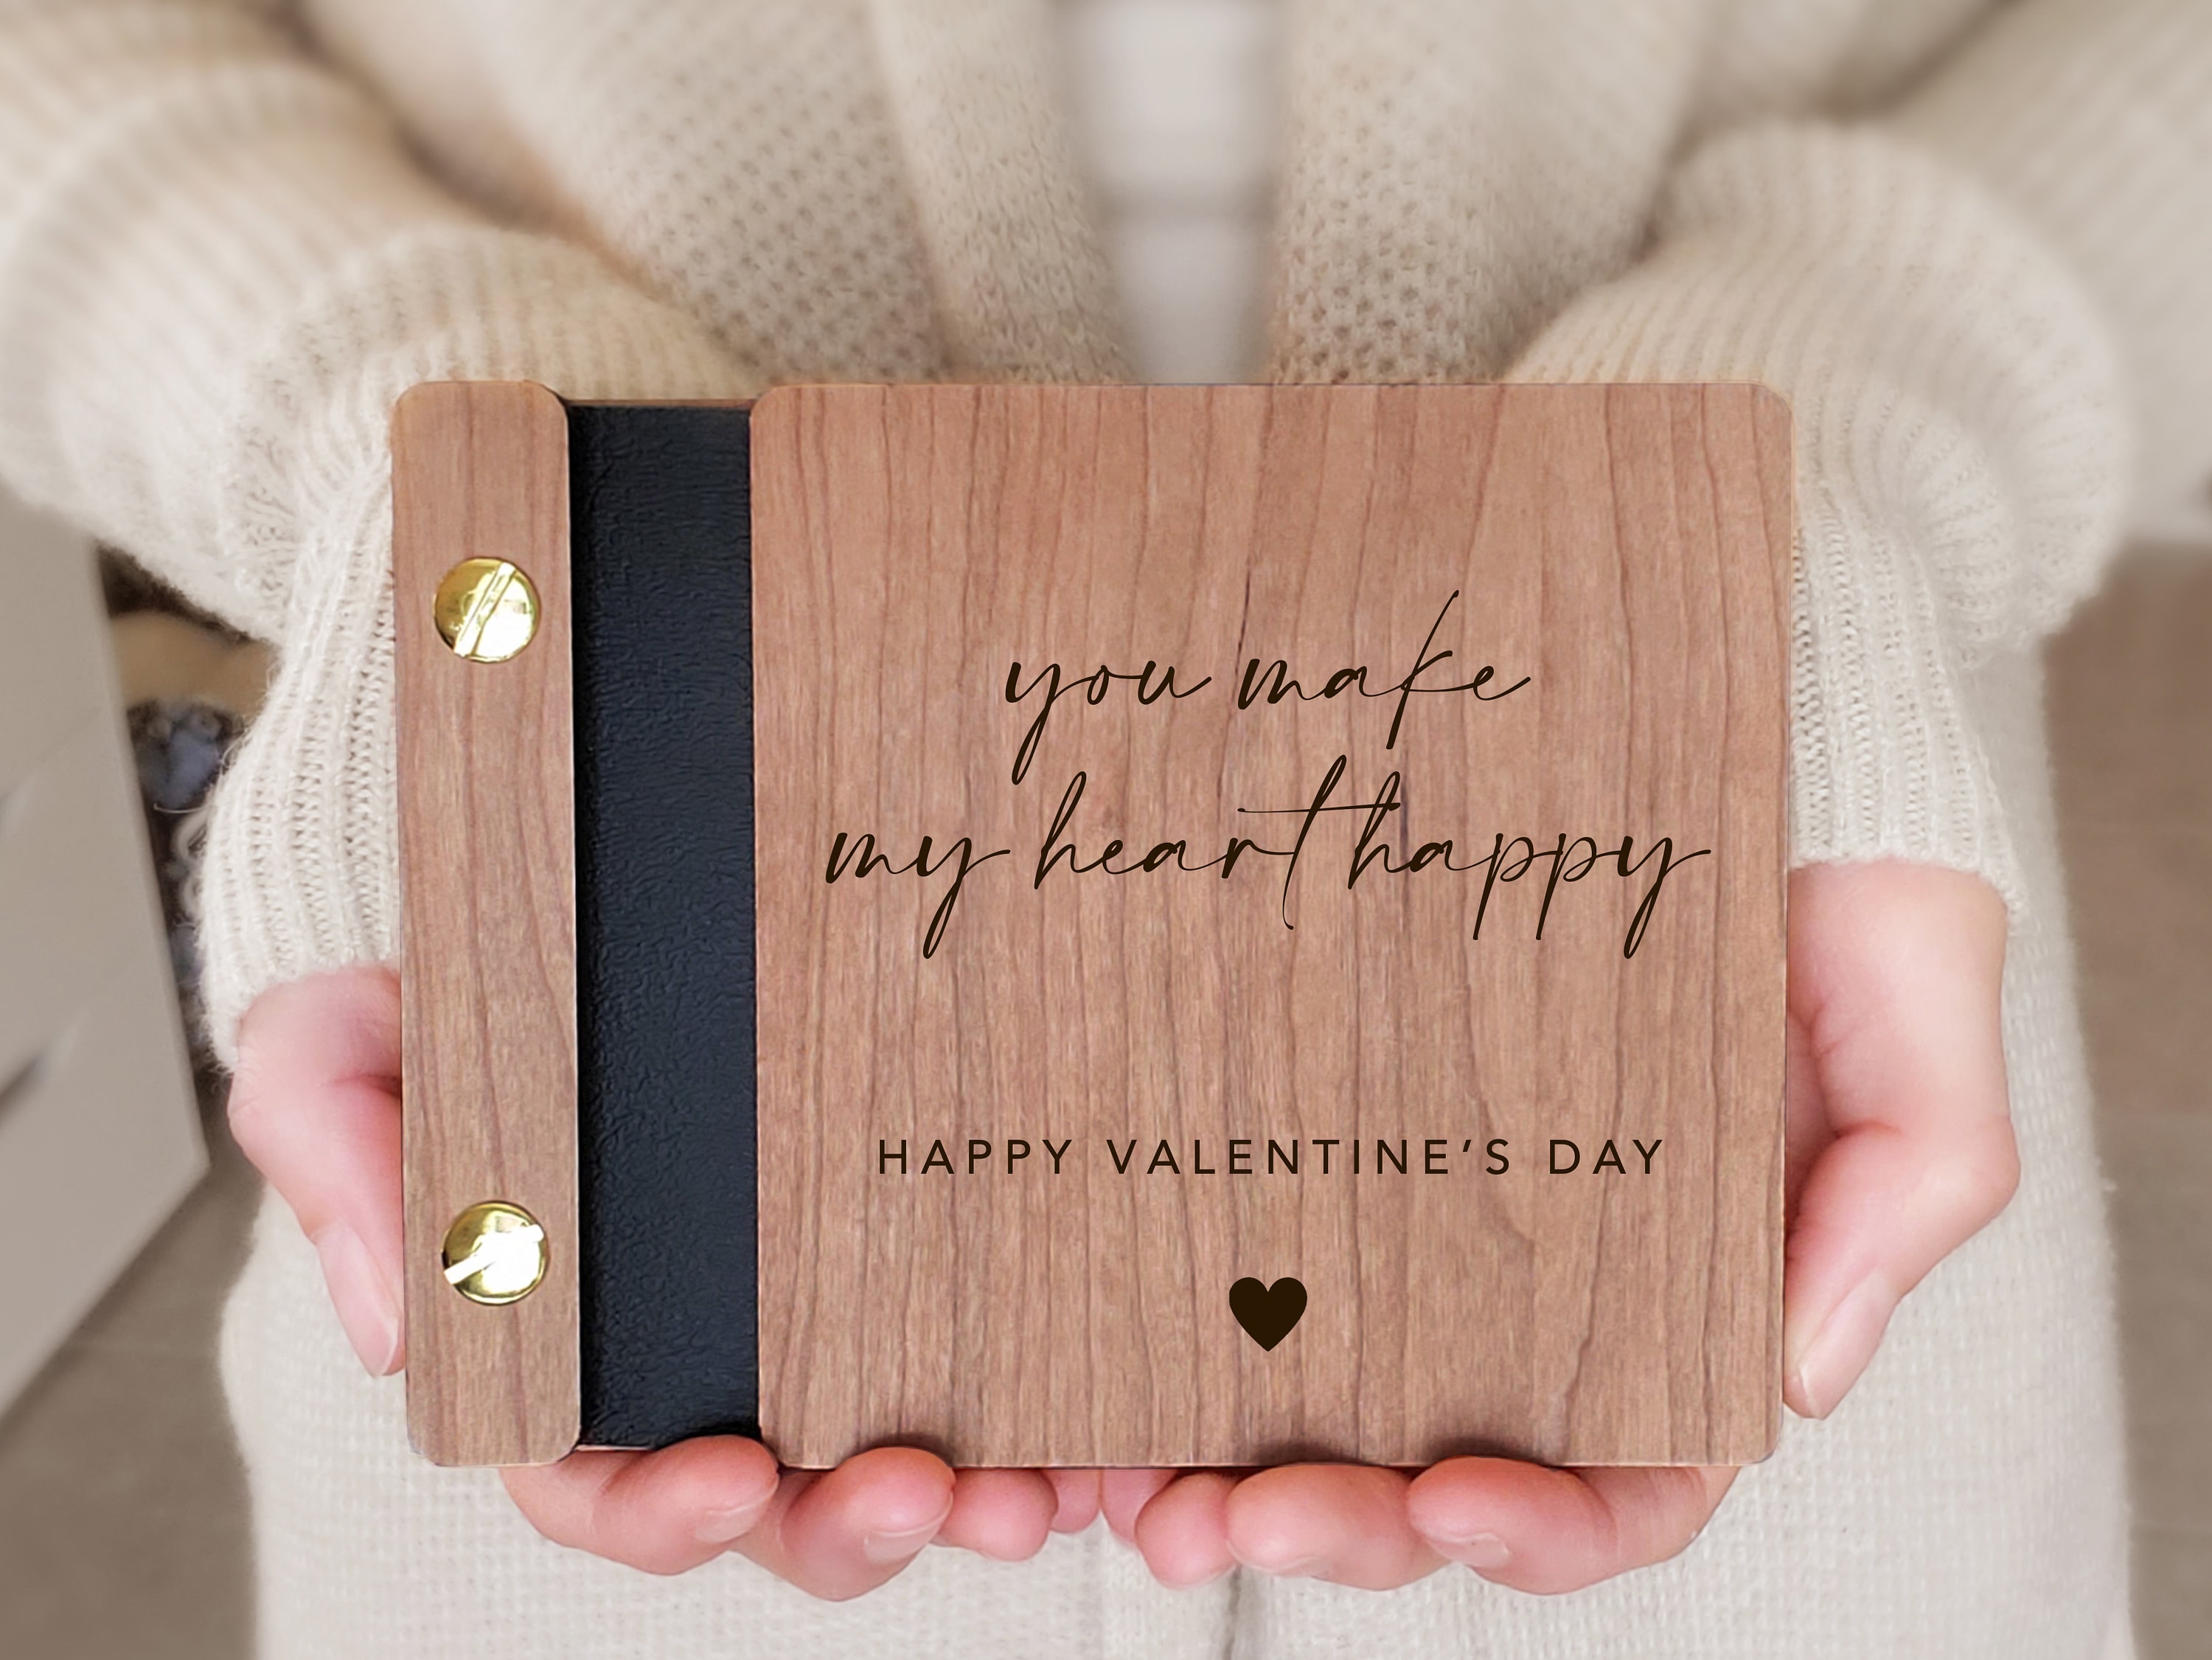 17 Romantic Sentimental Gifts for Men That Will Make Him Crying Secretly  Behind the Door